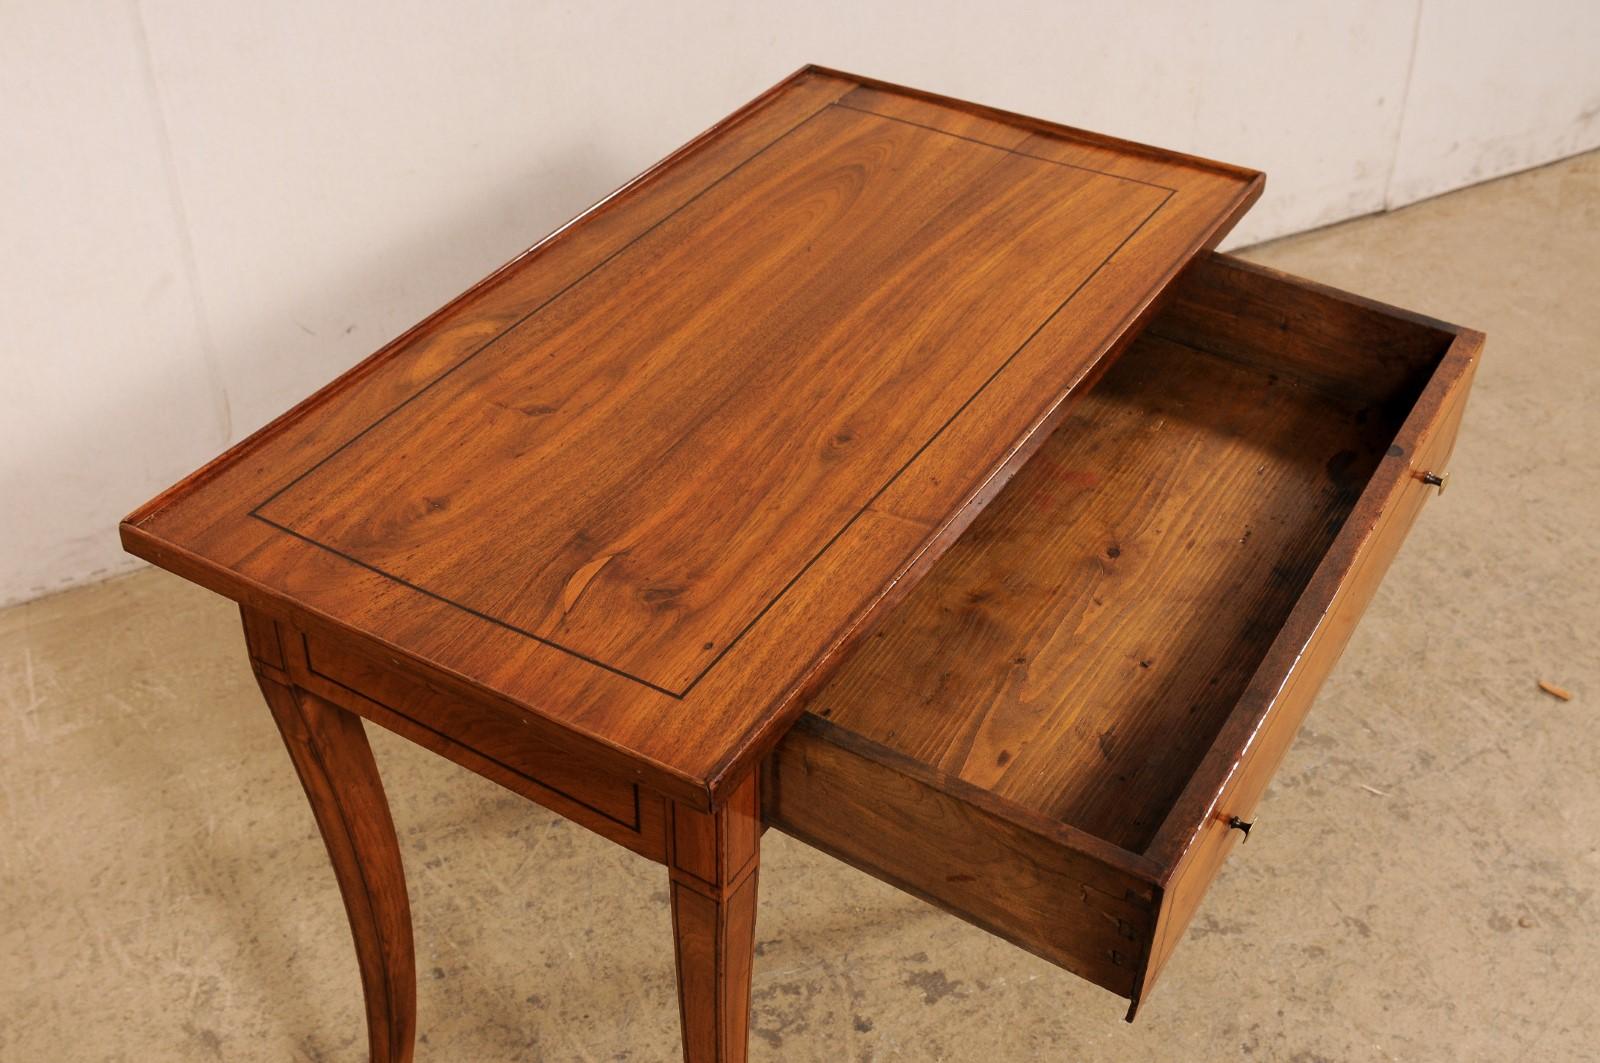 Wood An Early 19th C. Italian Occasional Table w/Inlay Accents & Elegant Sabre Legs For Sale